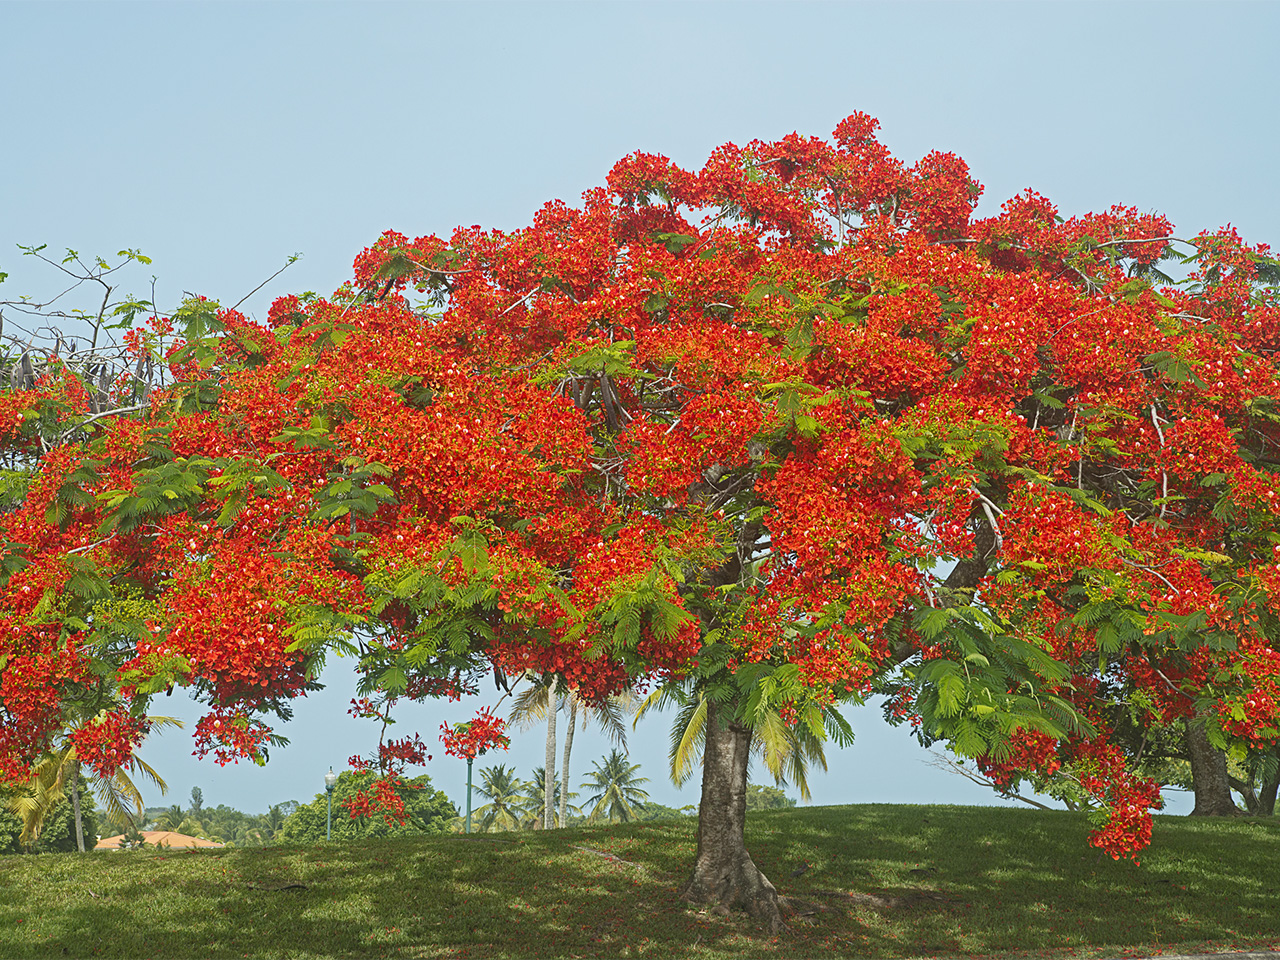 The wide branches of a flamboyan tree bursting with bright red color.